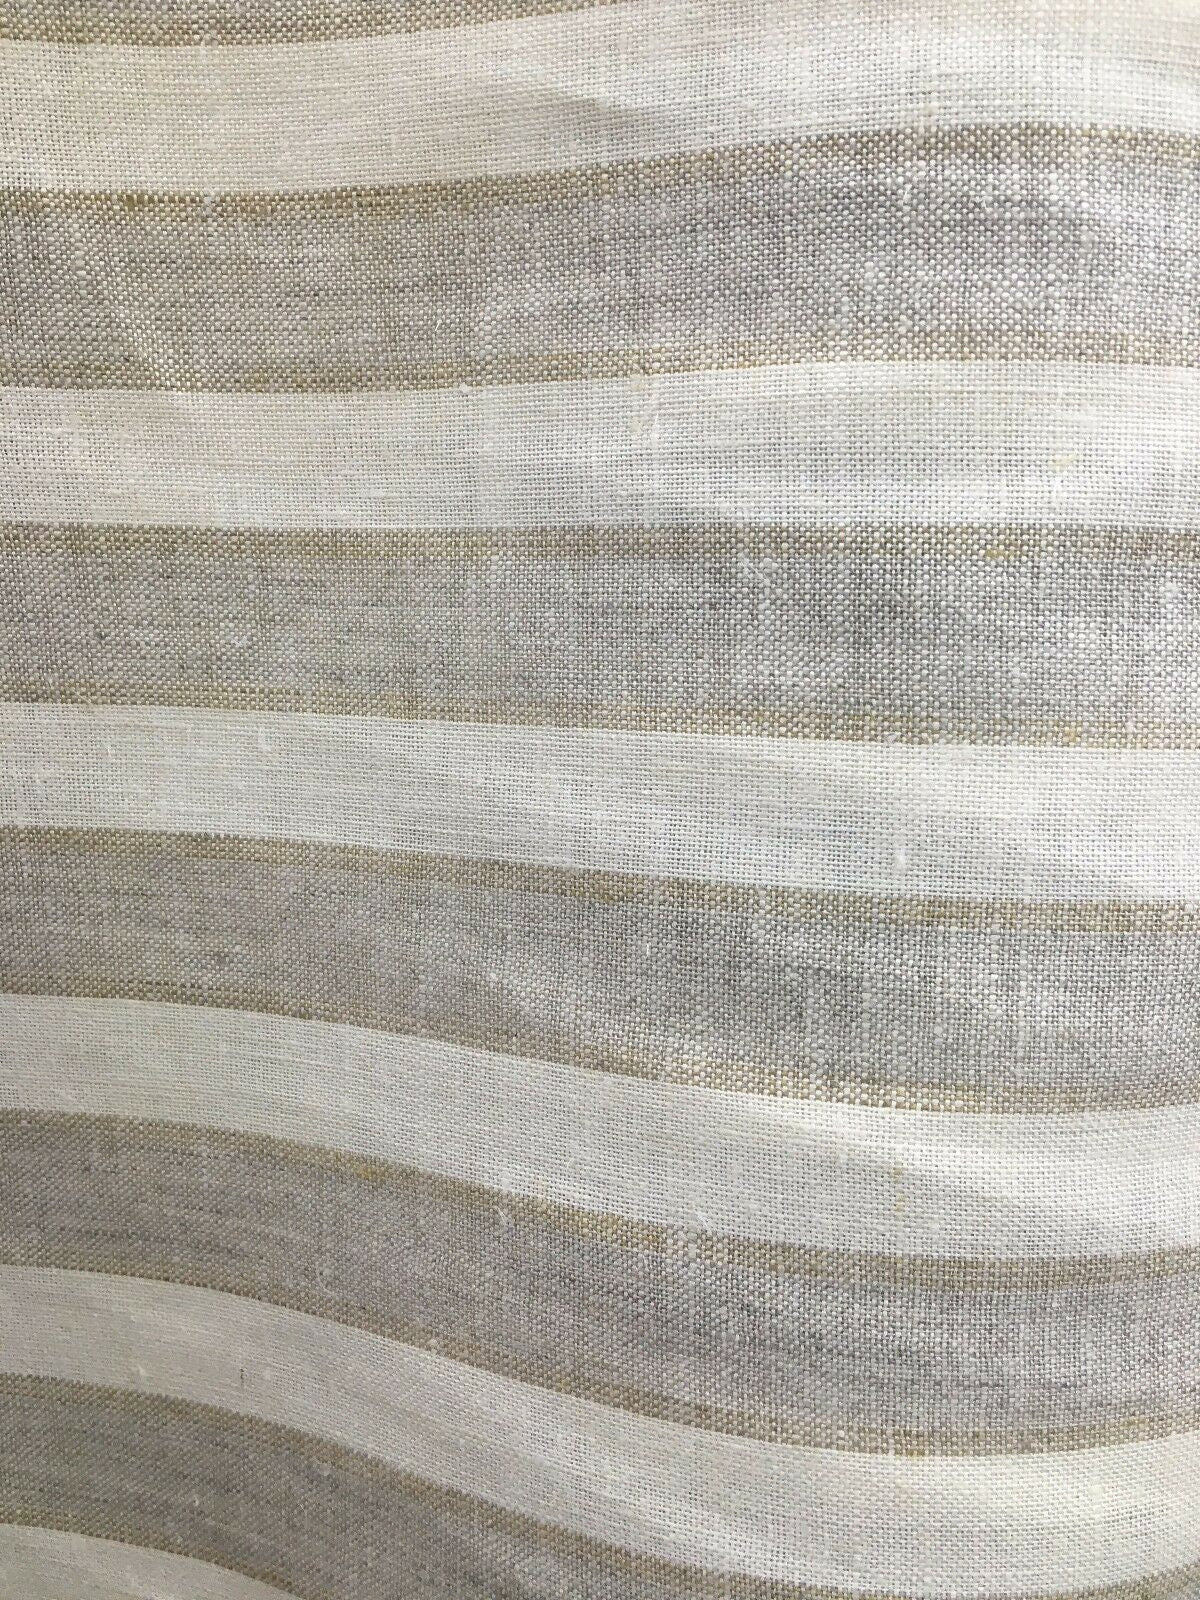 NATURAL IVORY Striped 100% Linen Fabric (60 in.) Sold By The Yard